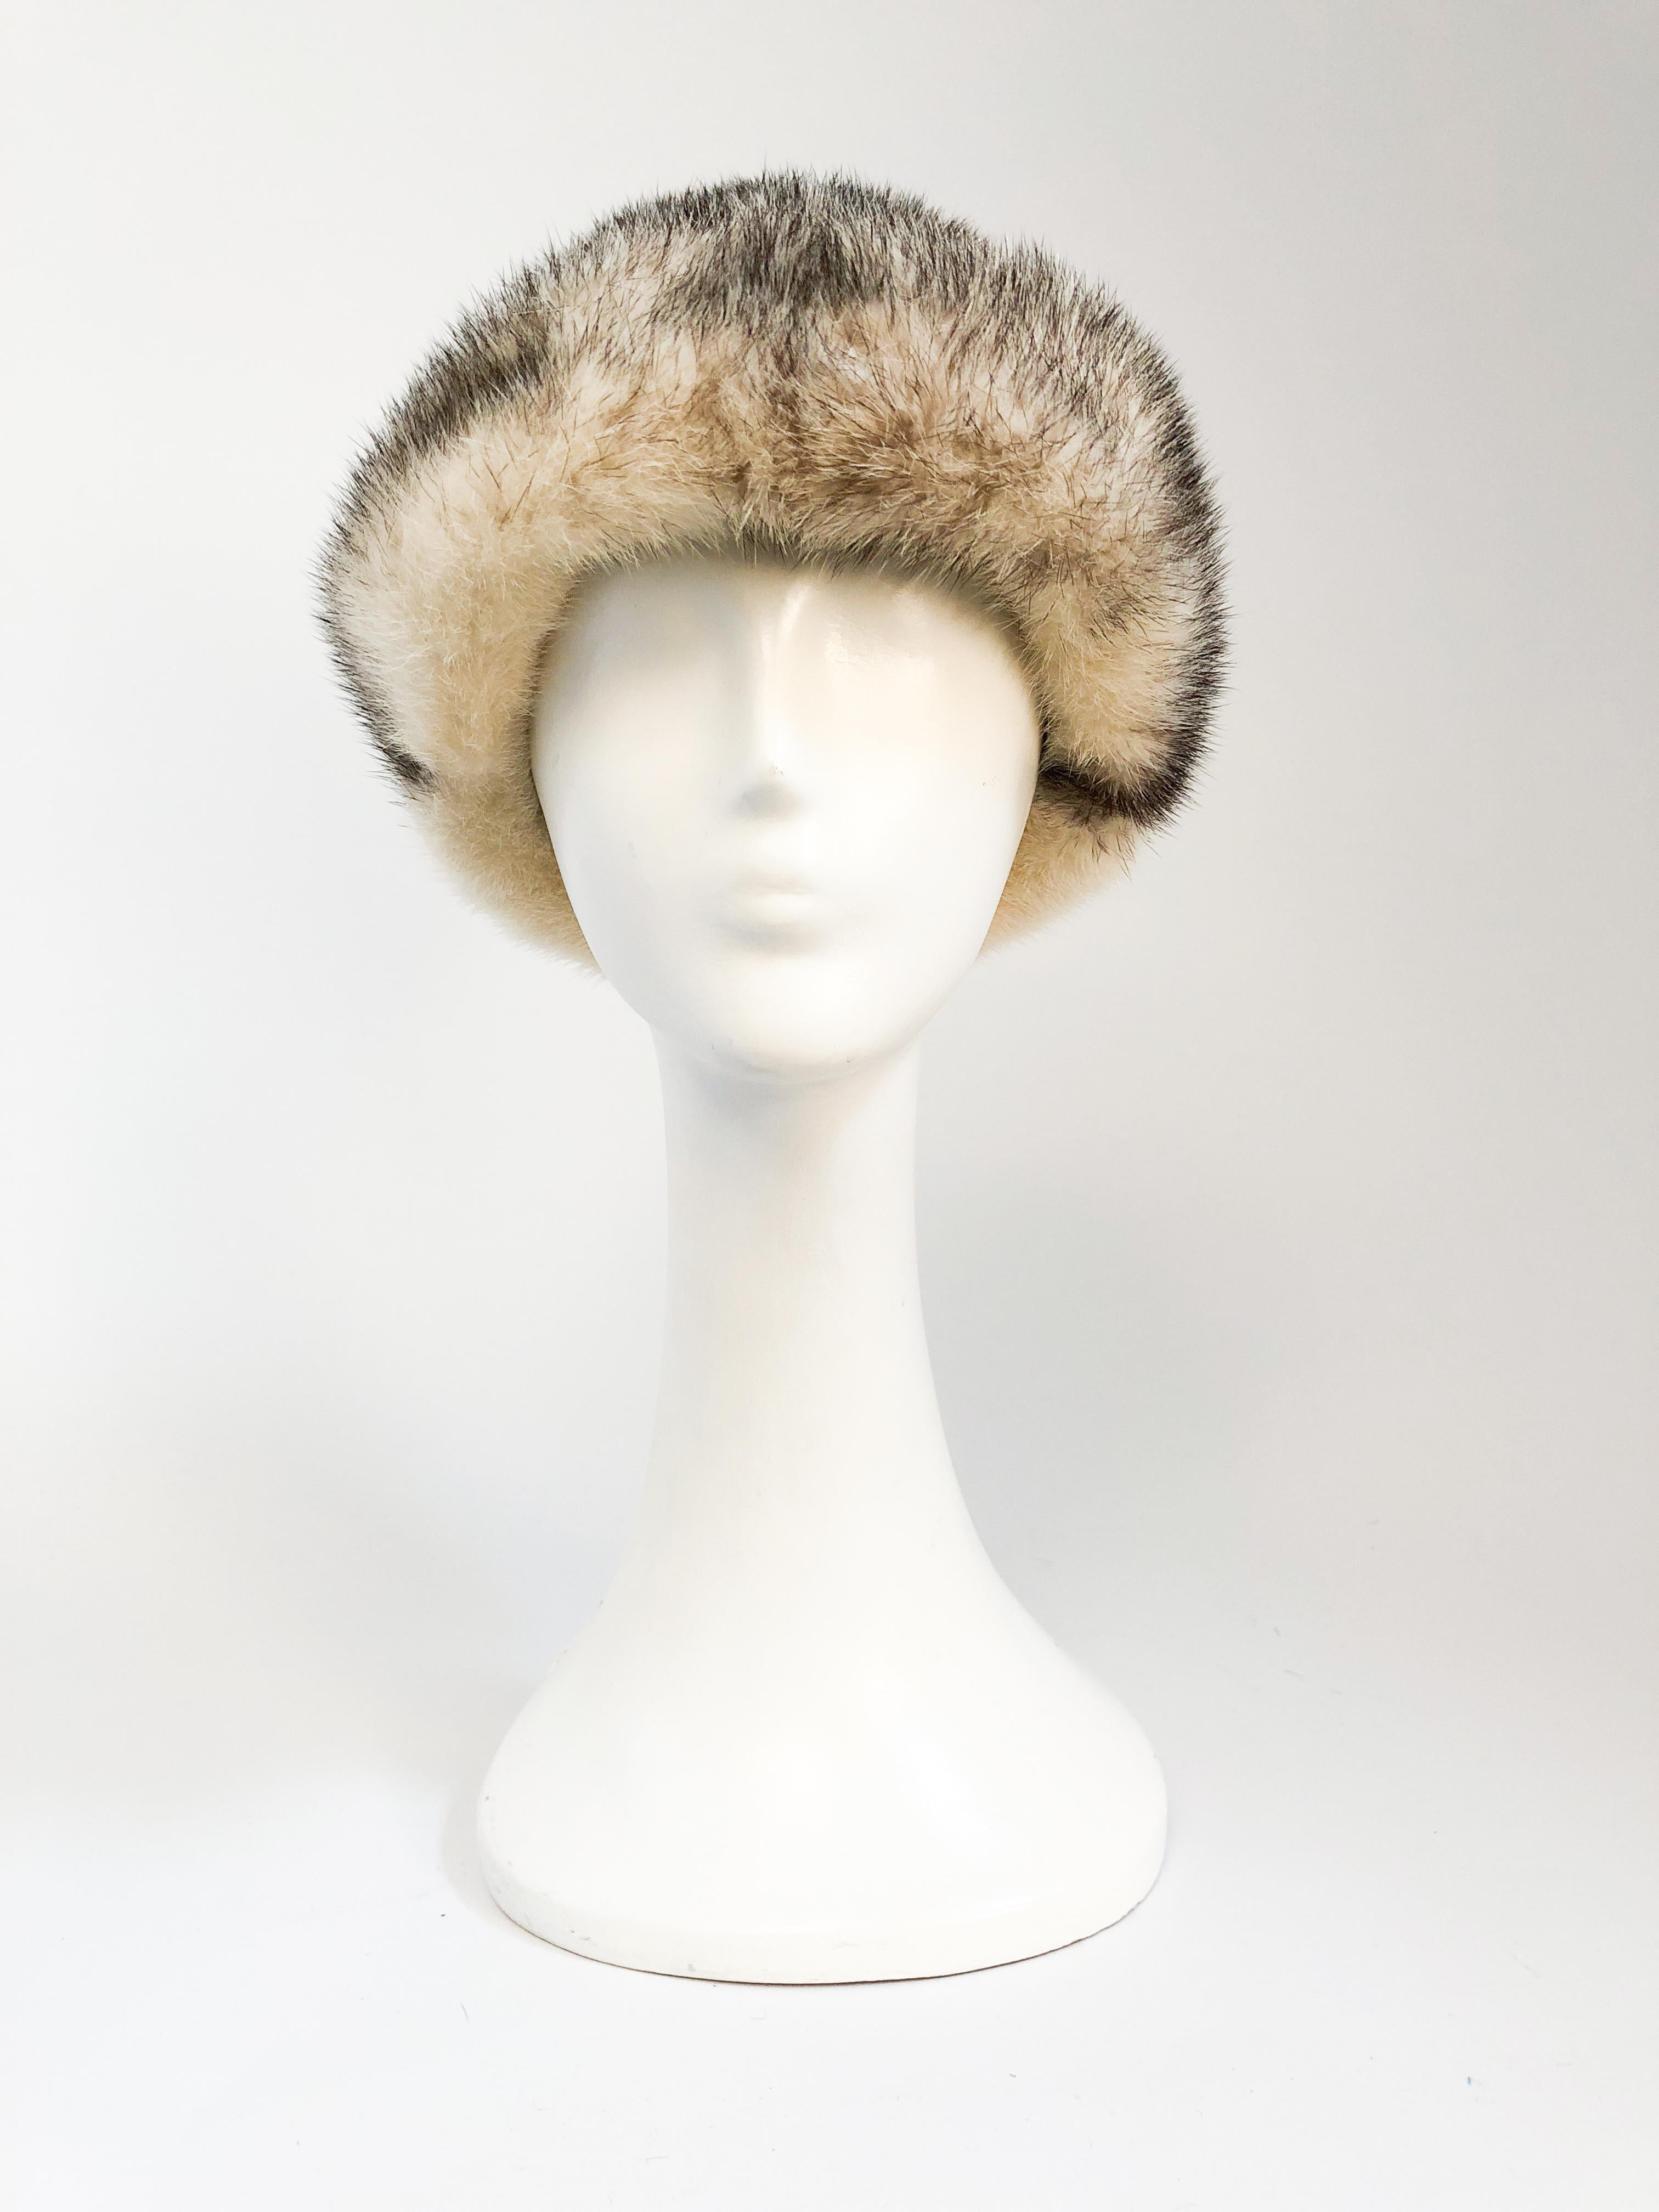 1960s Mink I. Magnin Hat. Cream and brown mink hat with rolled brim and woven inner band. Original I. Magnin department store tag attached